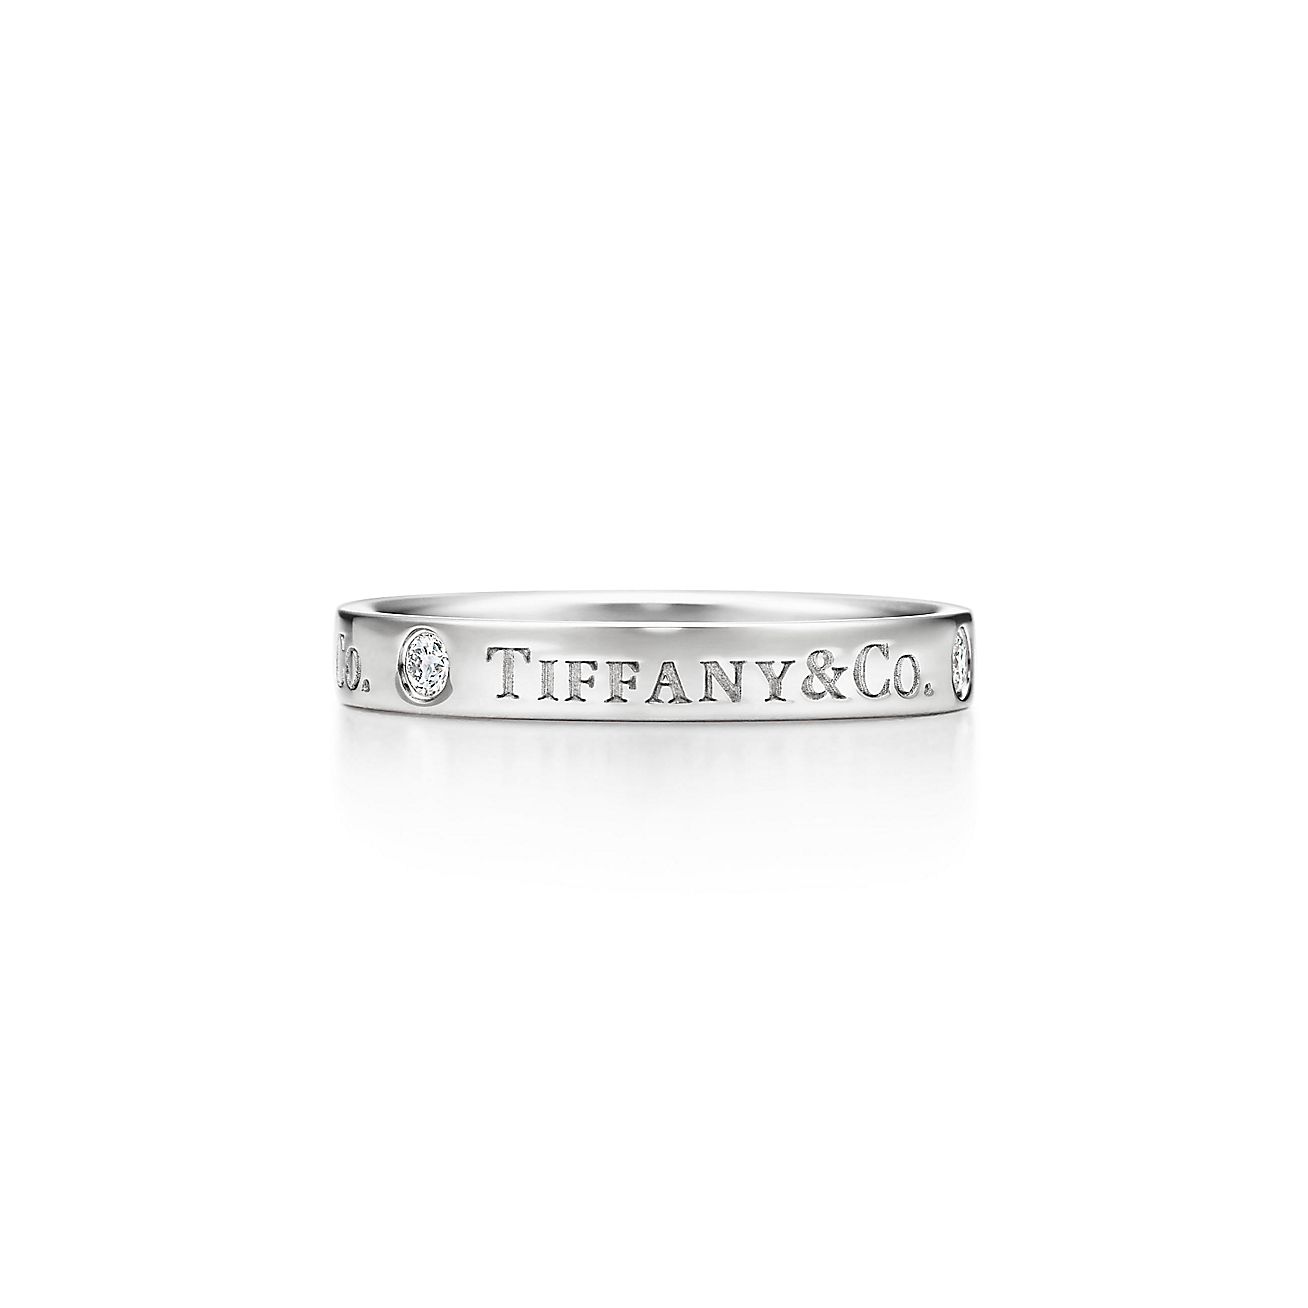 Emulatie precedent strijd Tiffany & Co.® band ring with diamonds in platinum, 3mm wide. | Tiffany &  Co.